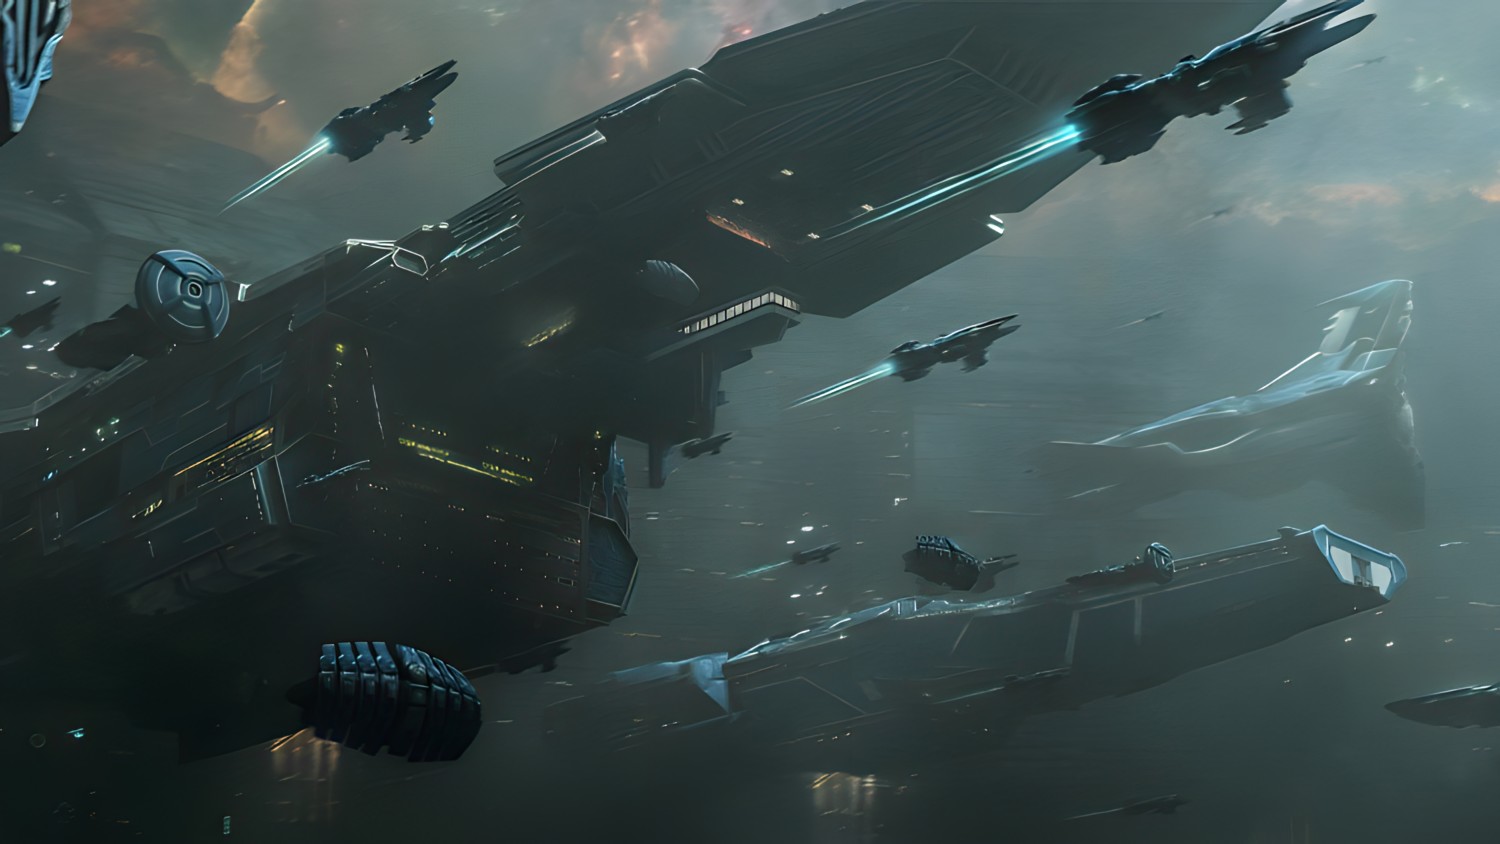 Eve Online Has 'No Plans' for Blockchain or Crypto